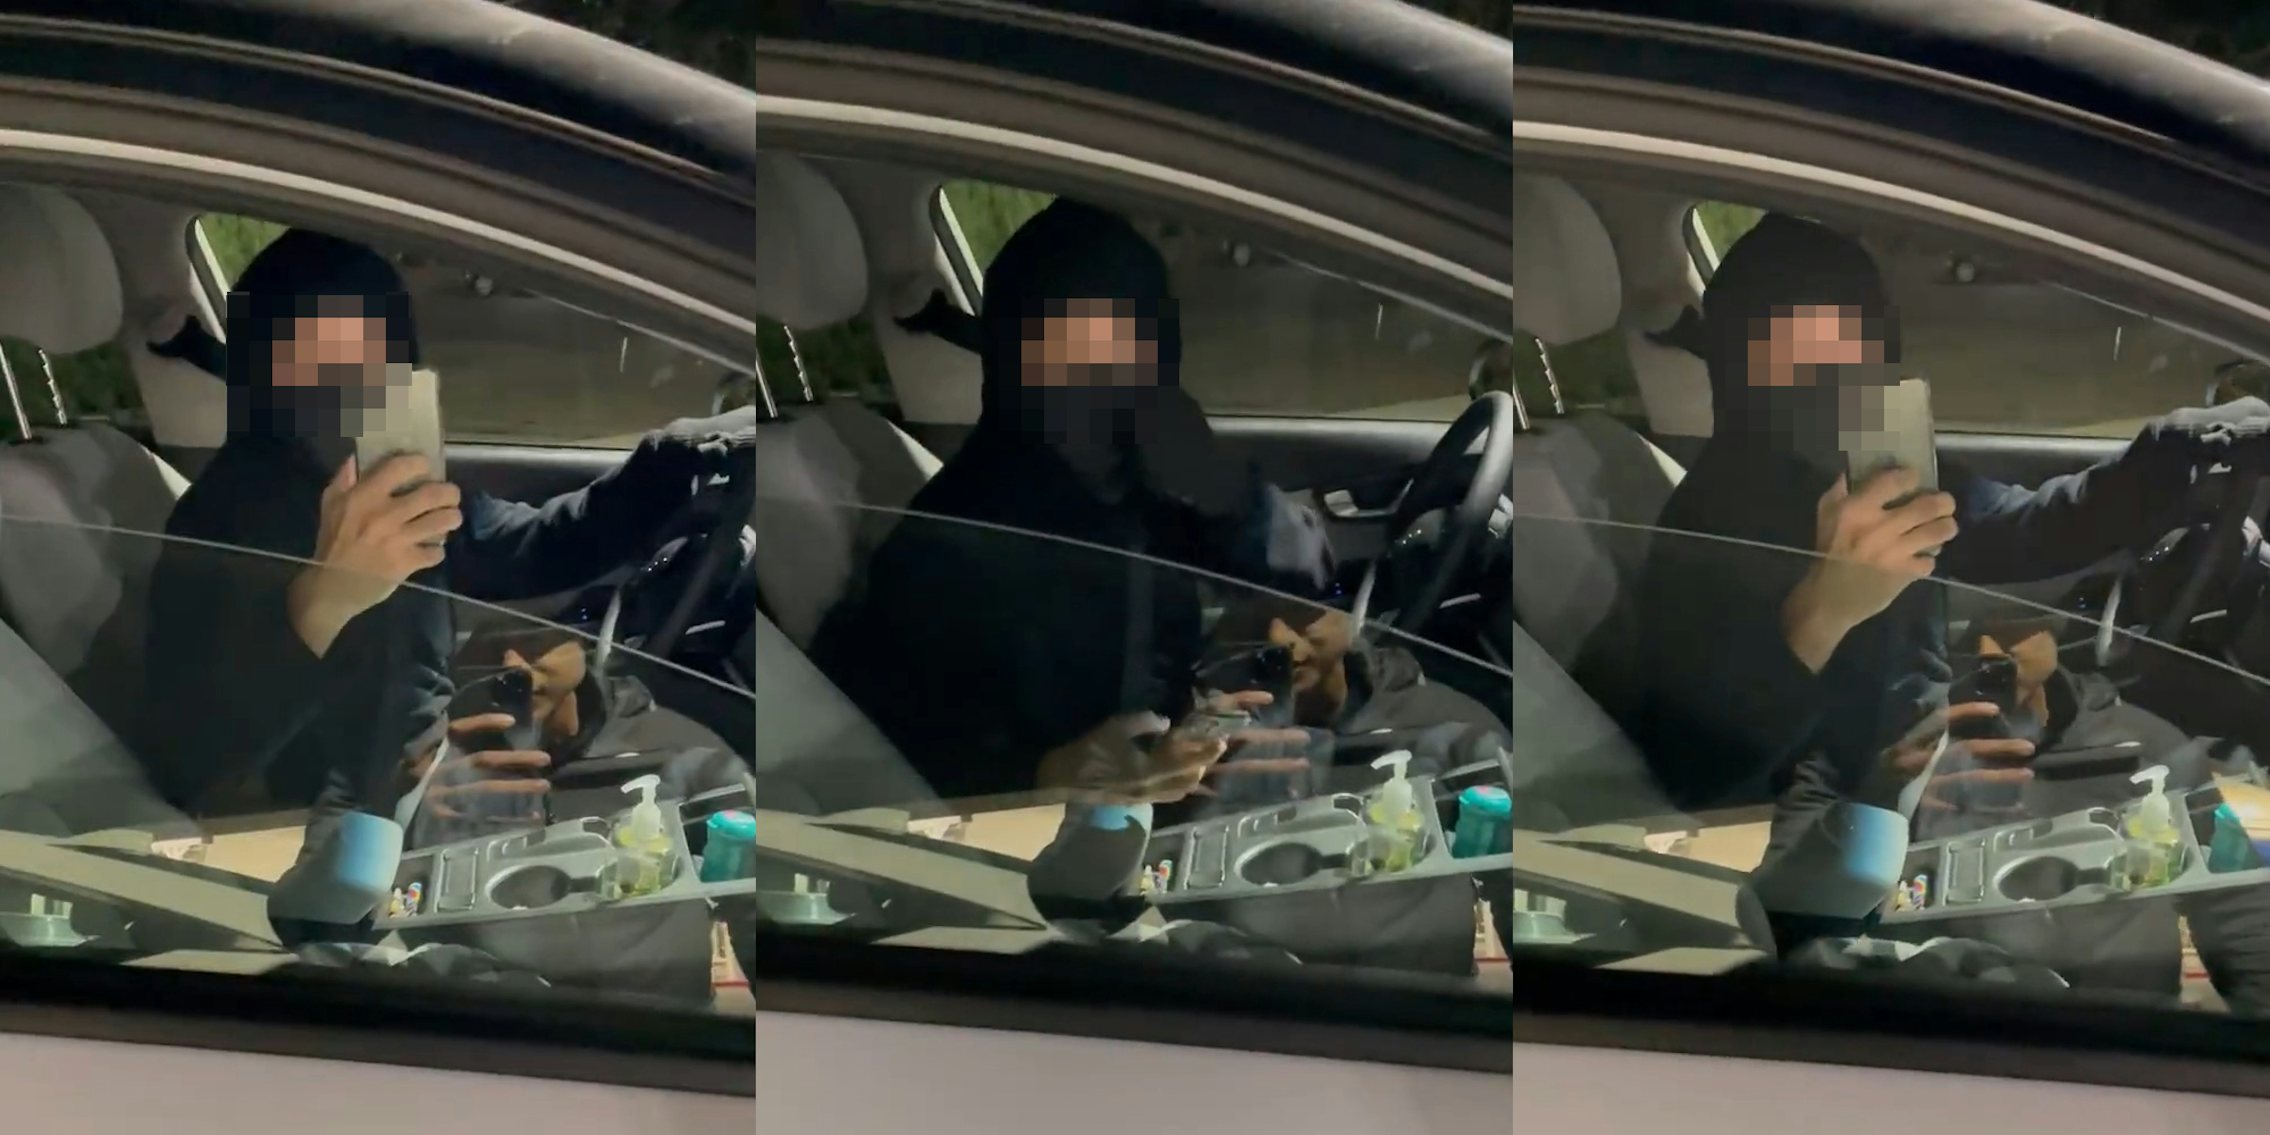 Man filming with phone in hand in car (l) man in car adjusting face mask (c) man in car with phone in hand (r)